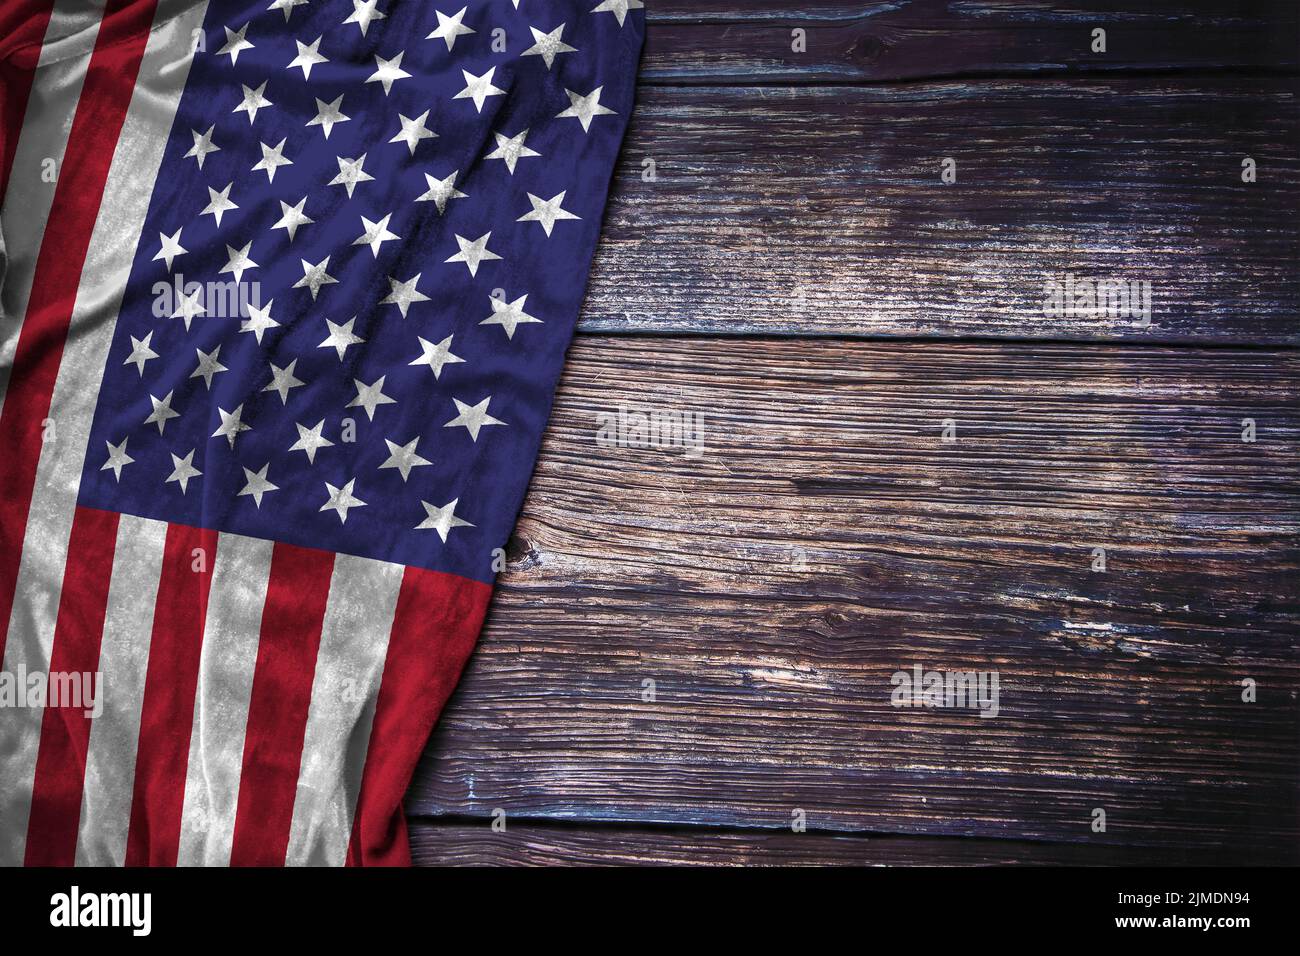 American US flag on rustic wooden background for Memorial Day, 4th of July or Labor Day concept. Stock Photo